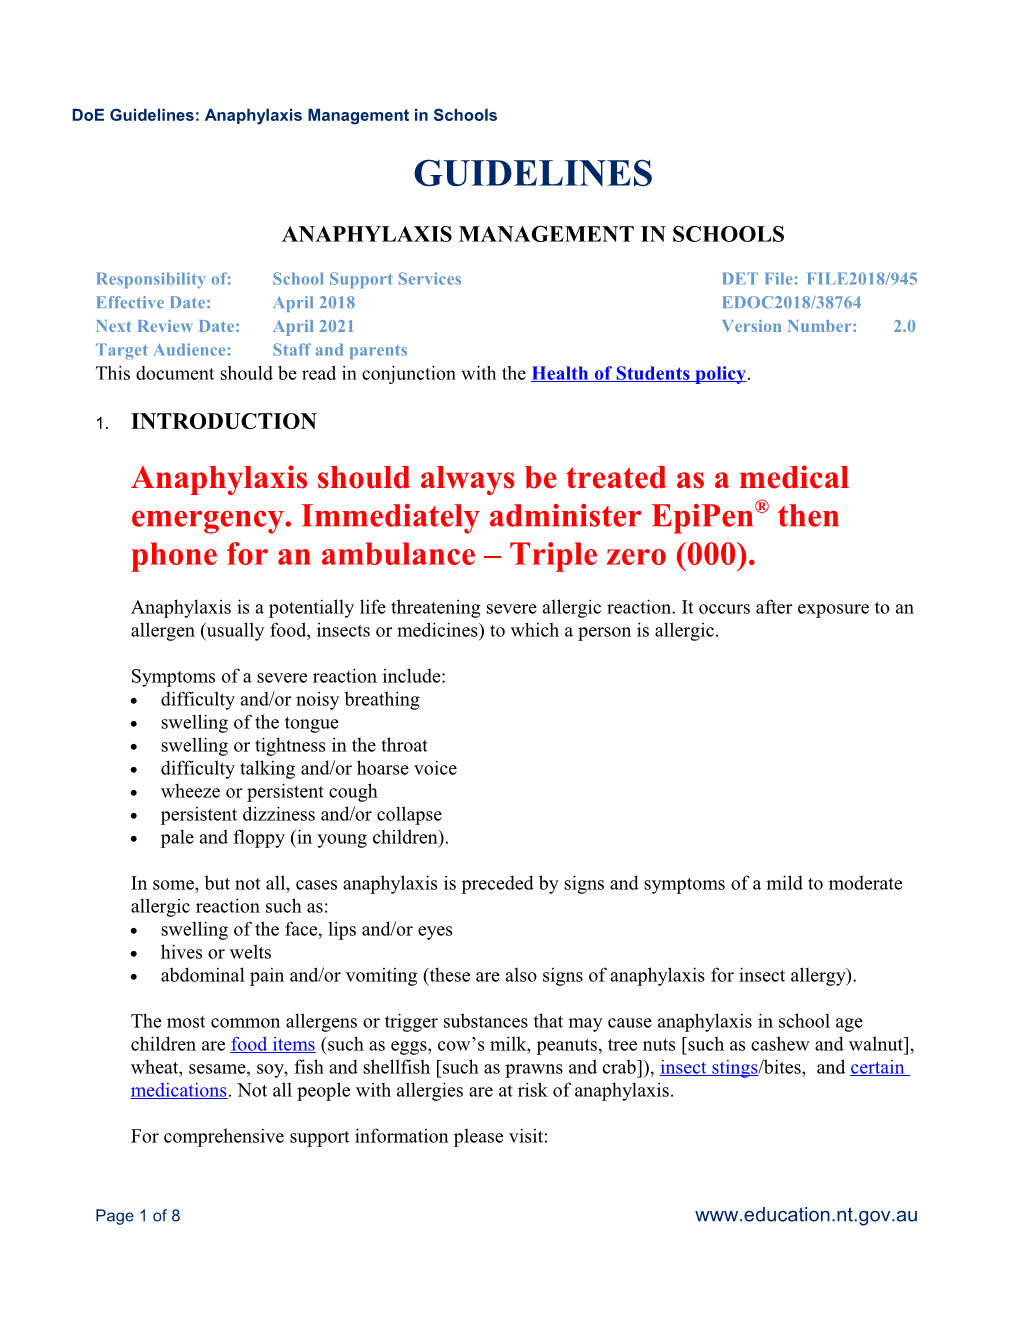 Anaphylaxis Management in Schools Guidelines